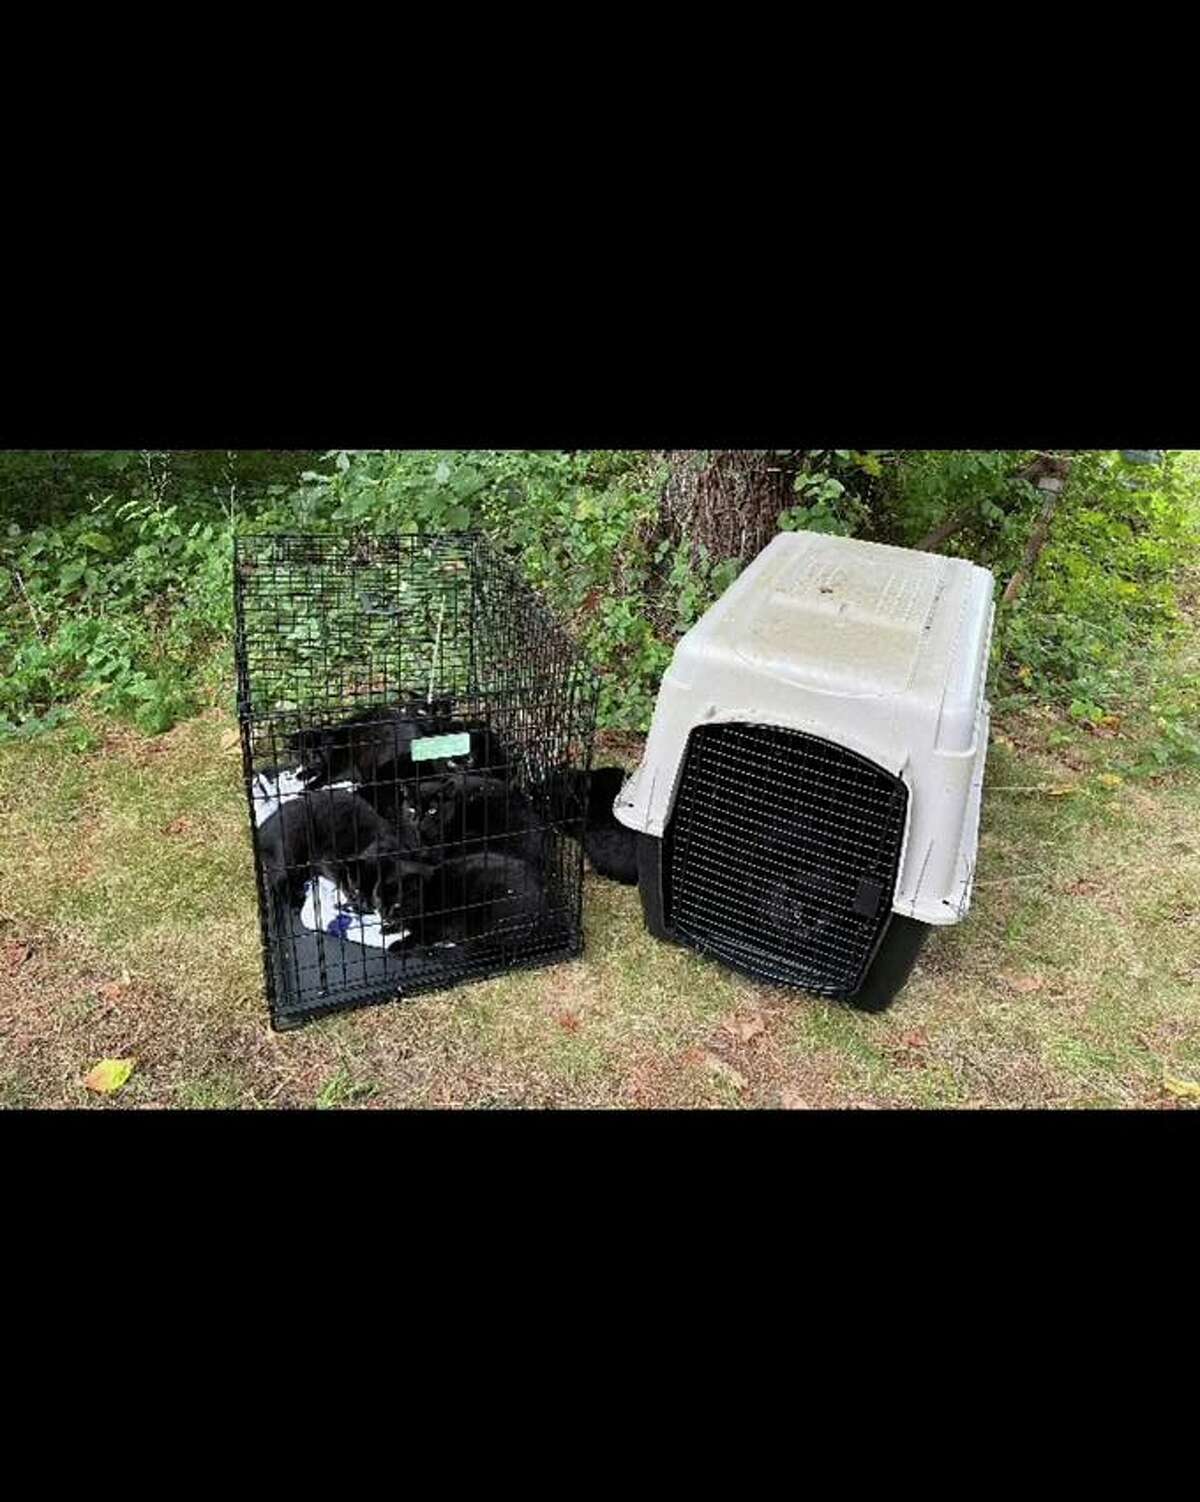 Crates containing cats were left on River Road over the weekend, according to Stratford Animal Control. 